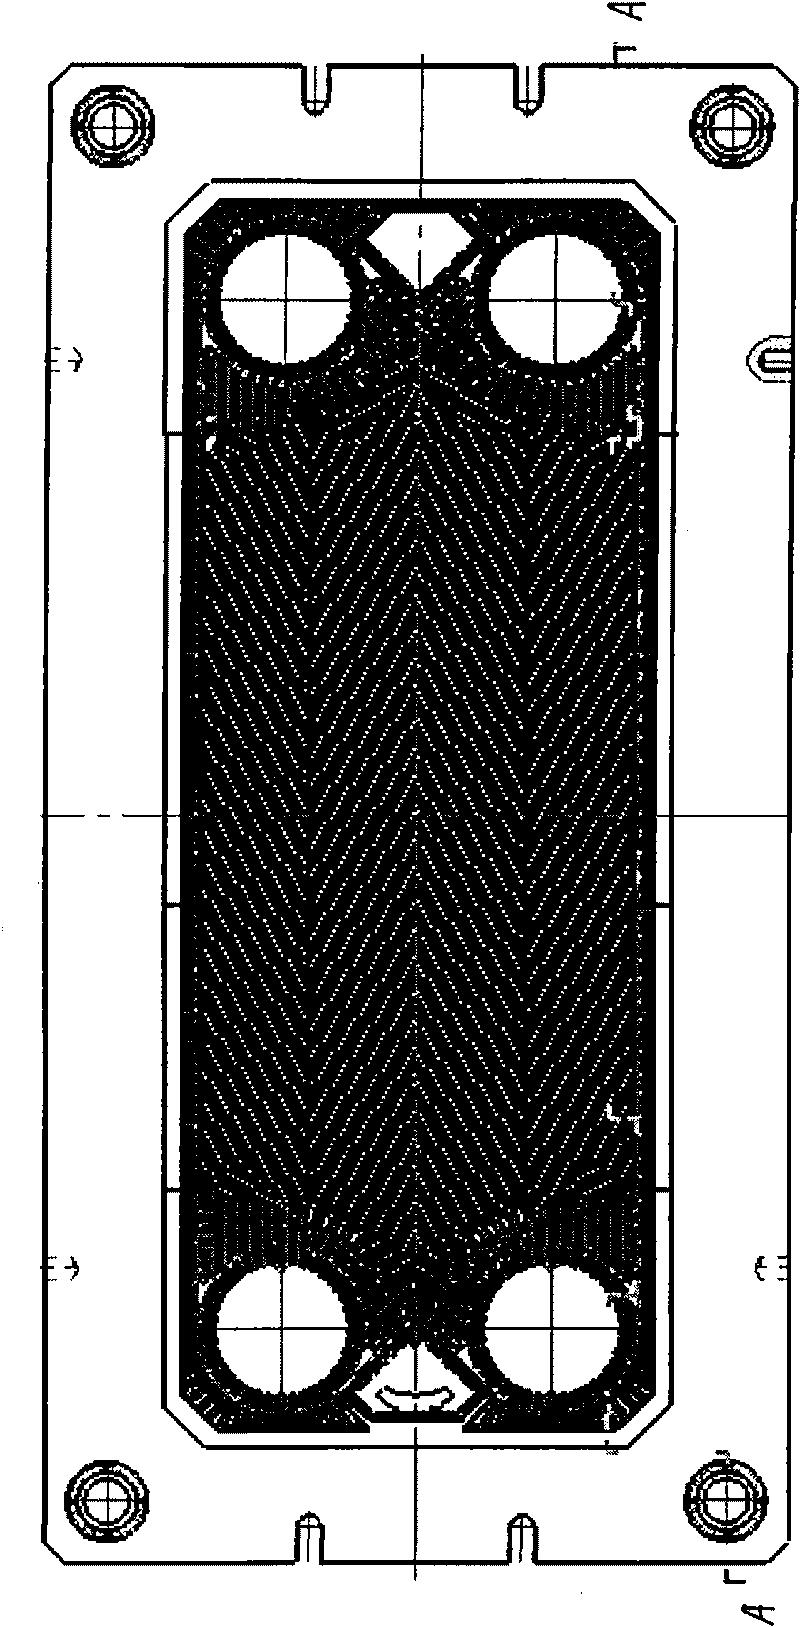 Manufacture method of sheets of V-shaped plate heat exchanger